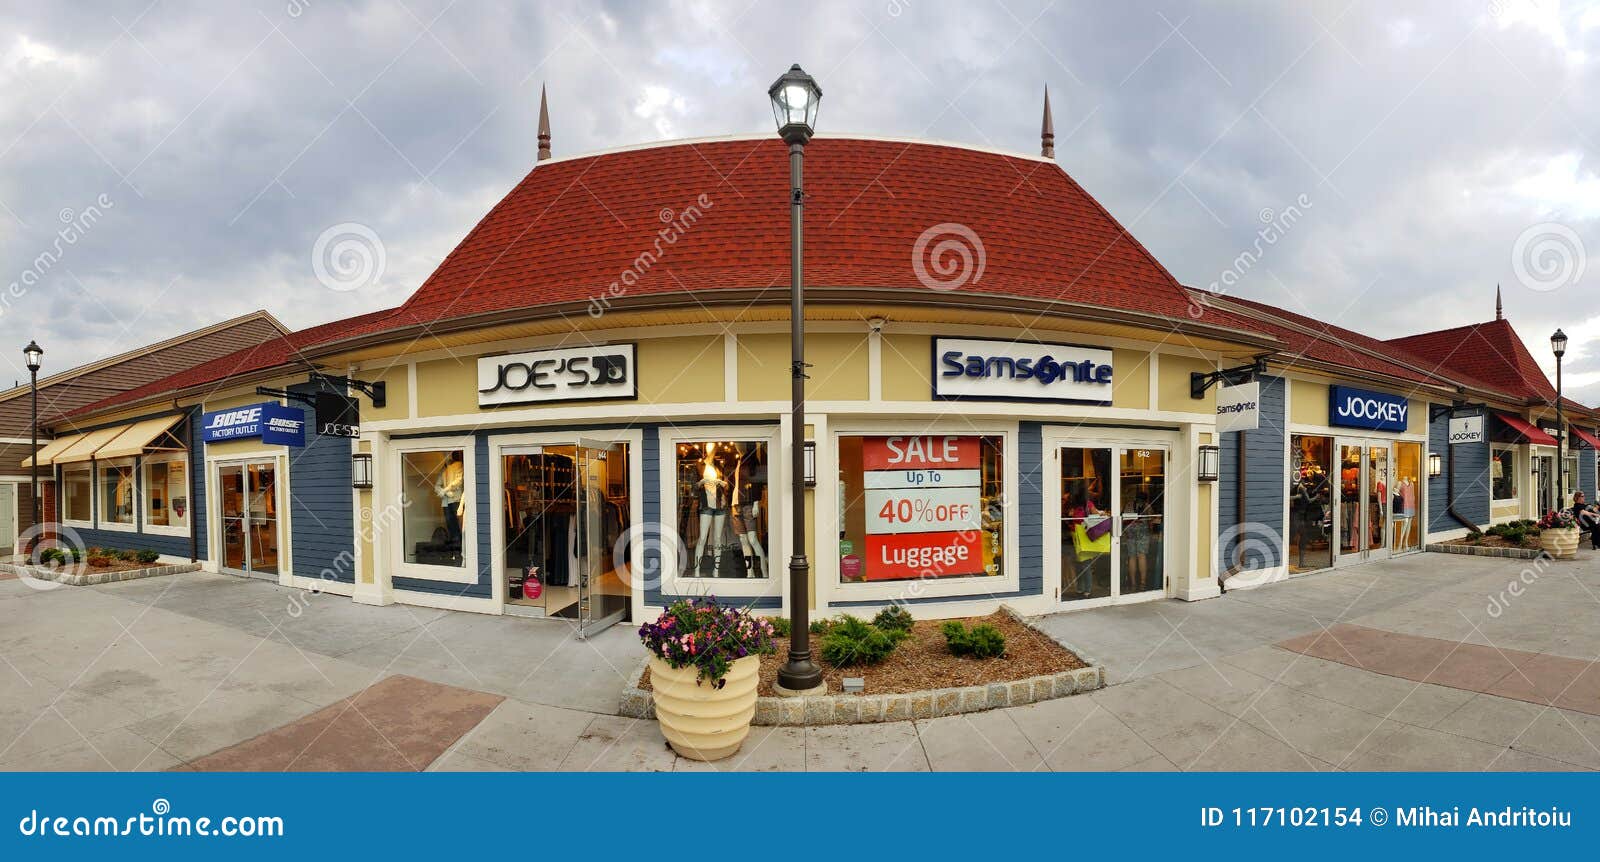 Store Panorama in Woodbury Common Premium Outlet Mall Editorial